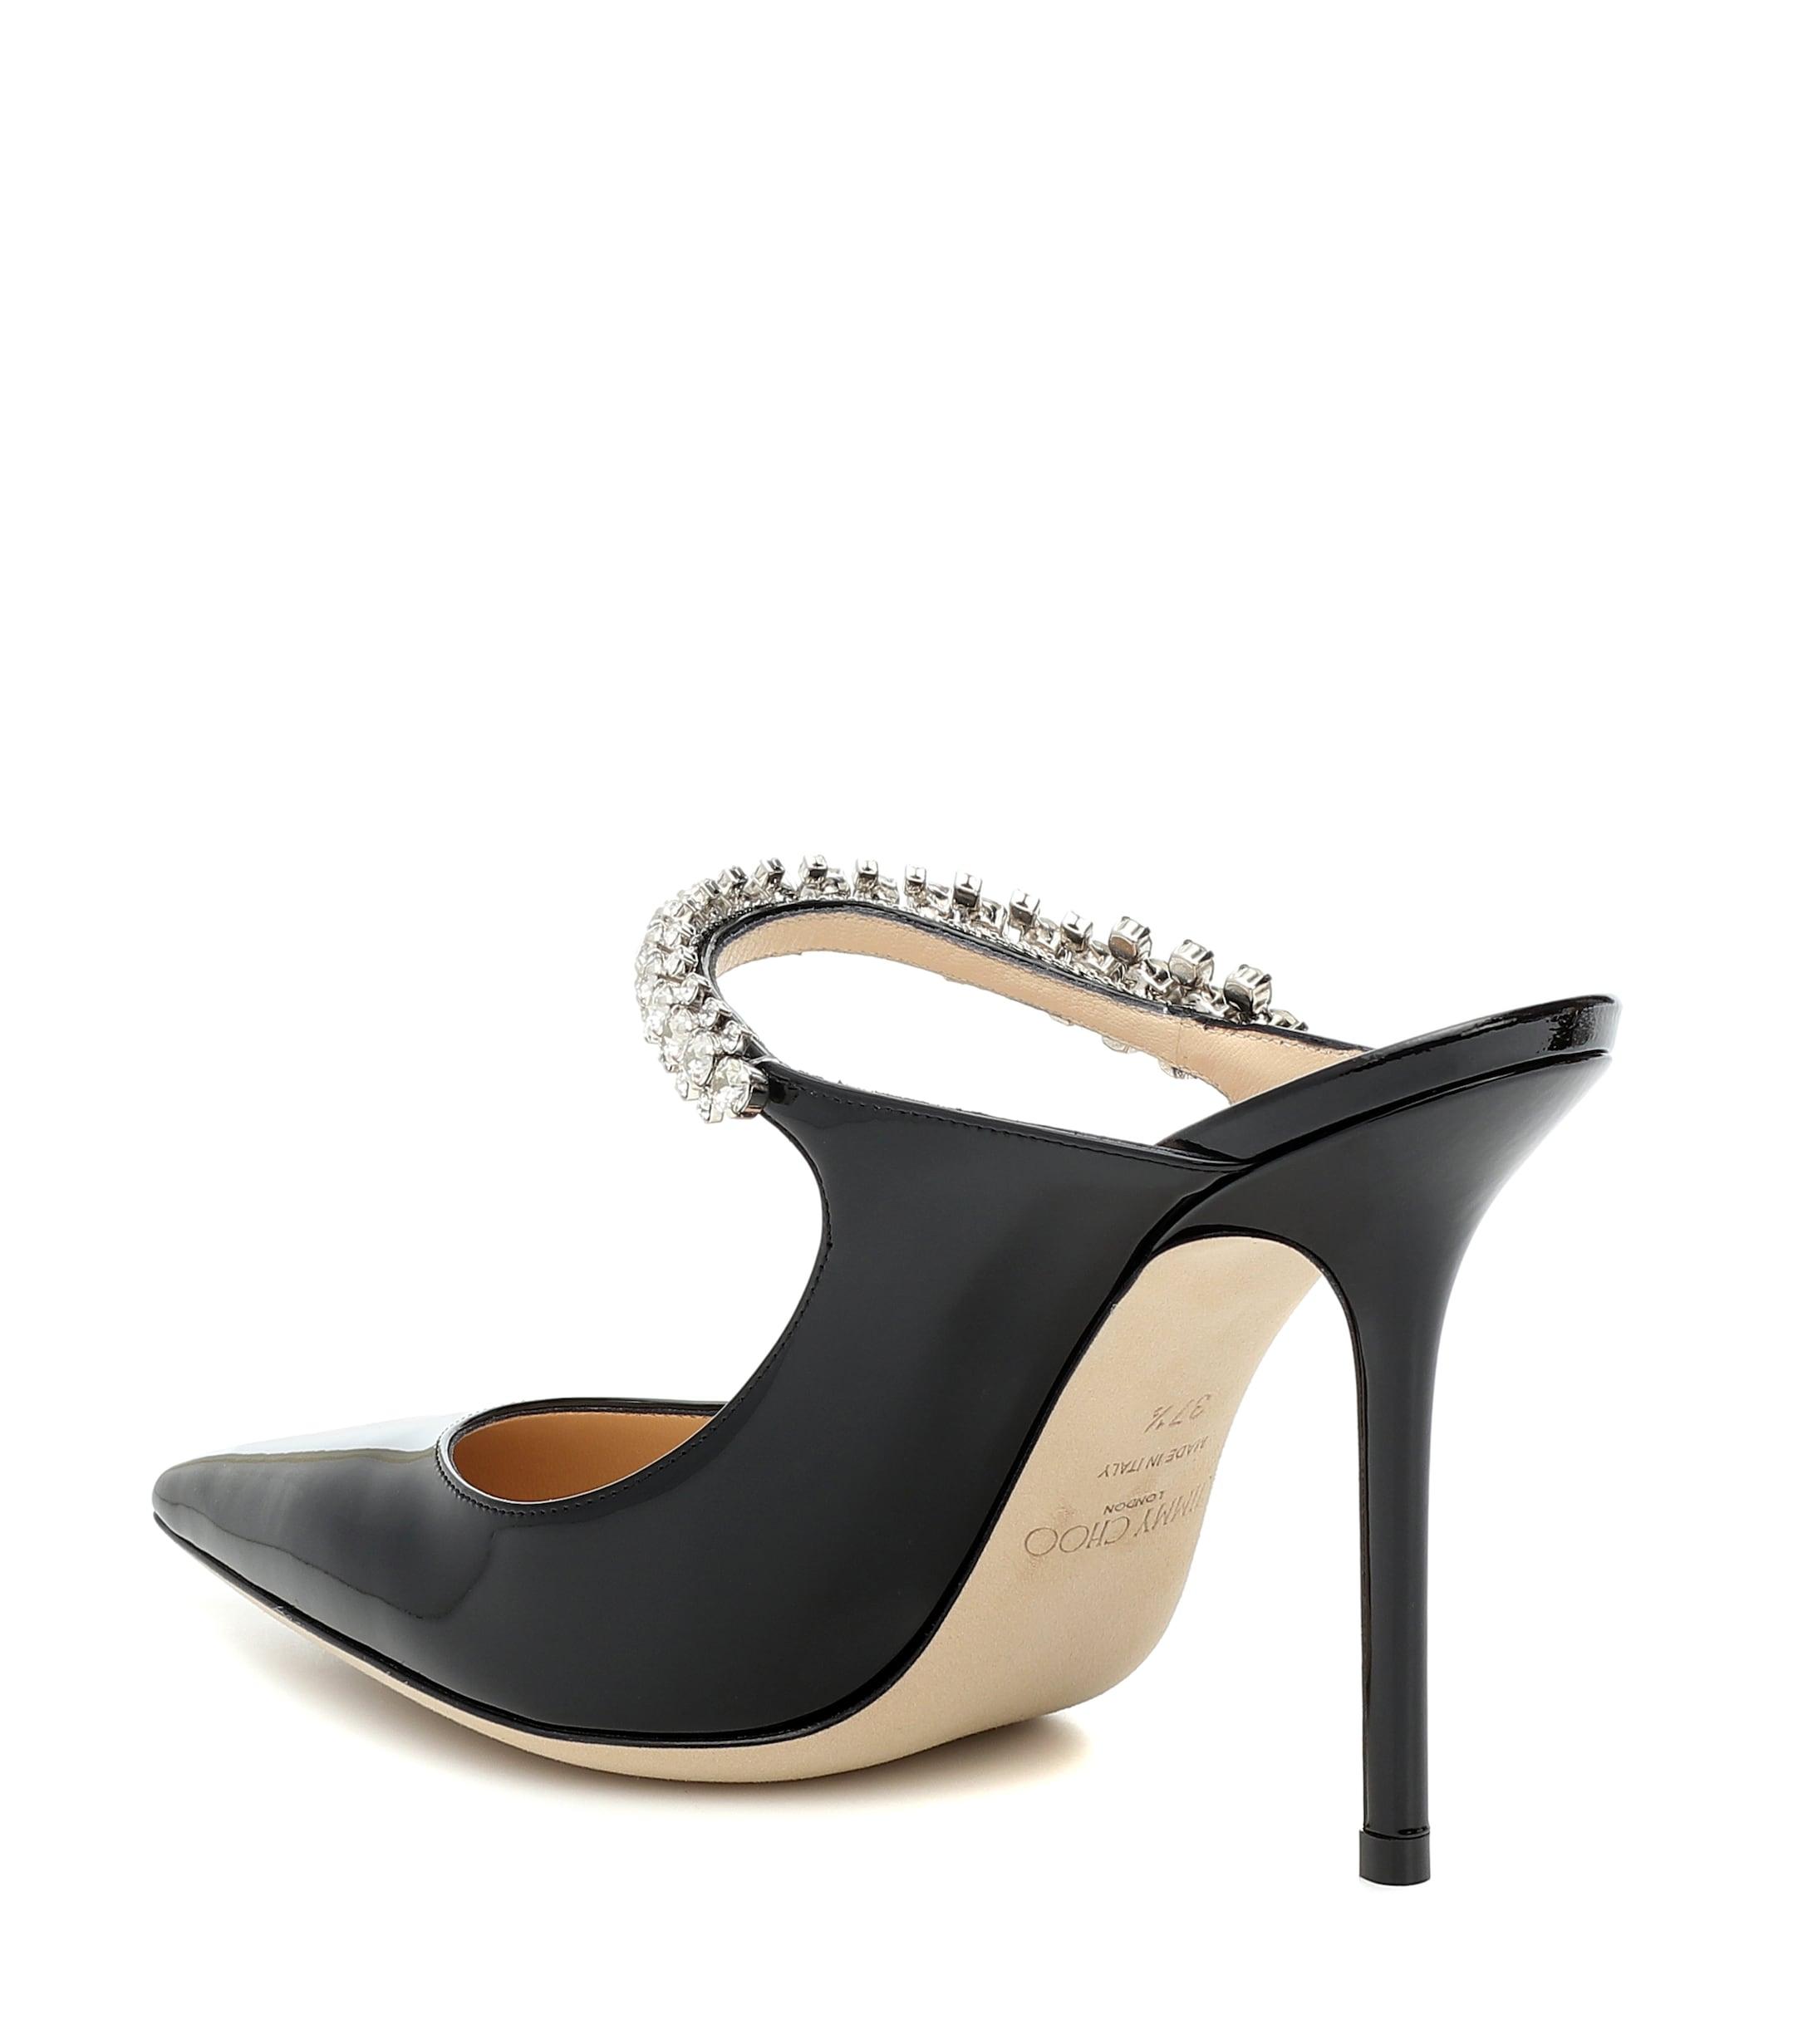 Jimmy Choo Bing 100 Patent Leather Mules in Black - Lyst